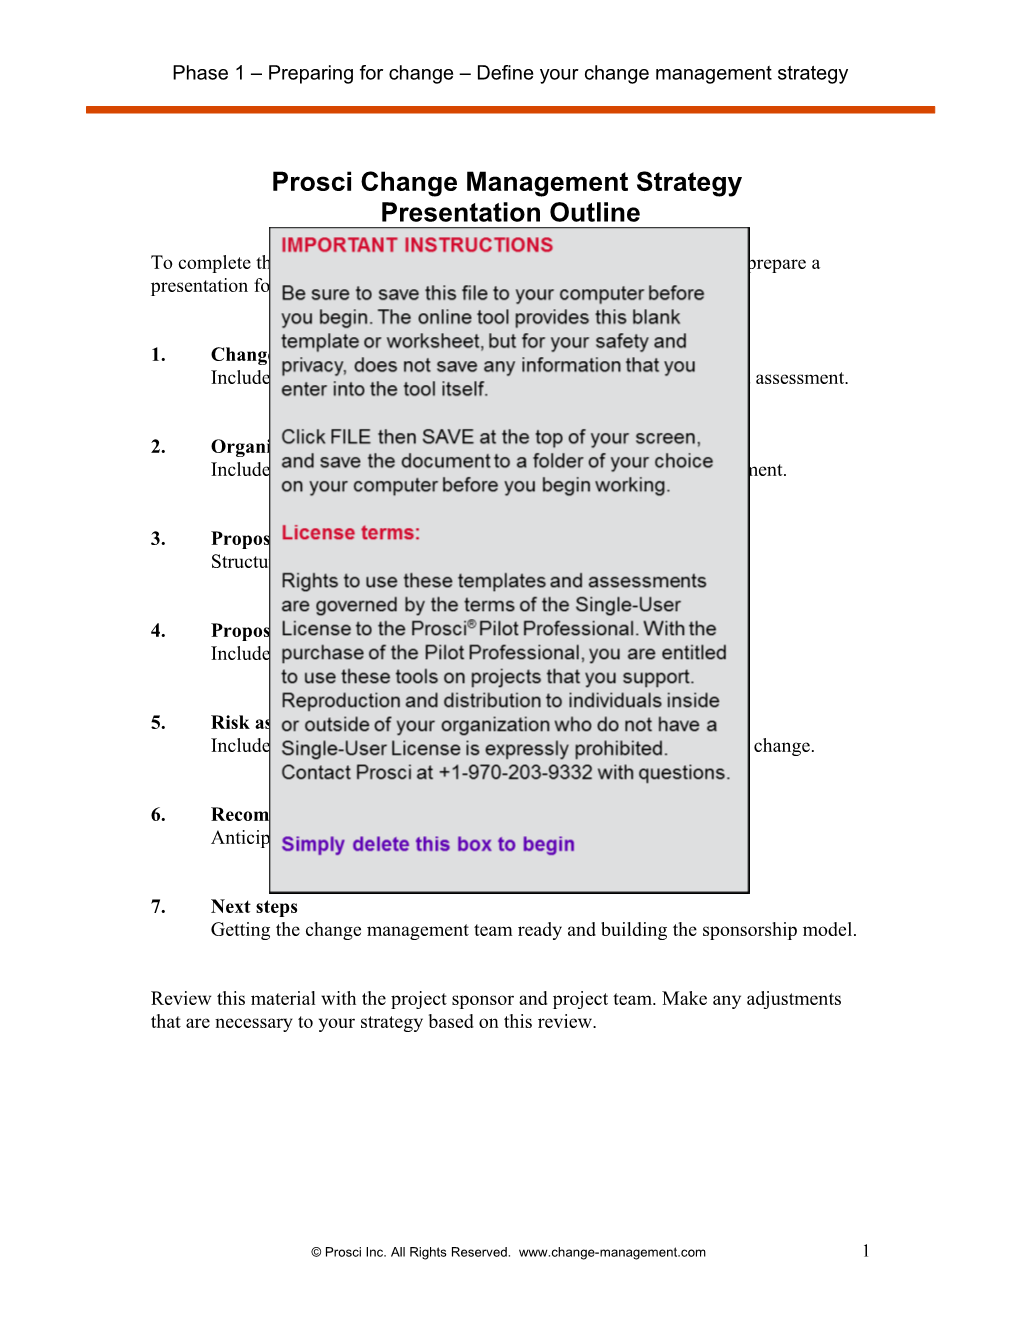 Phase 1 Preparing for Change Define Your Change Management Strategy